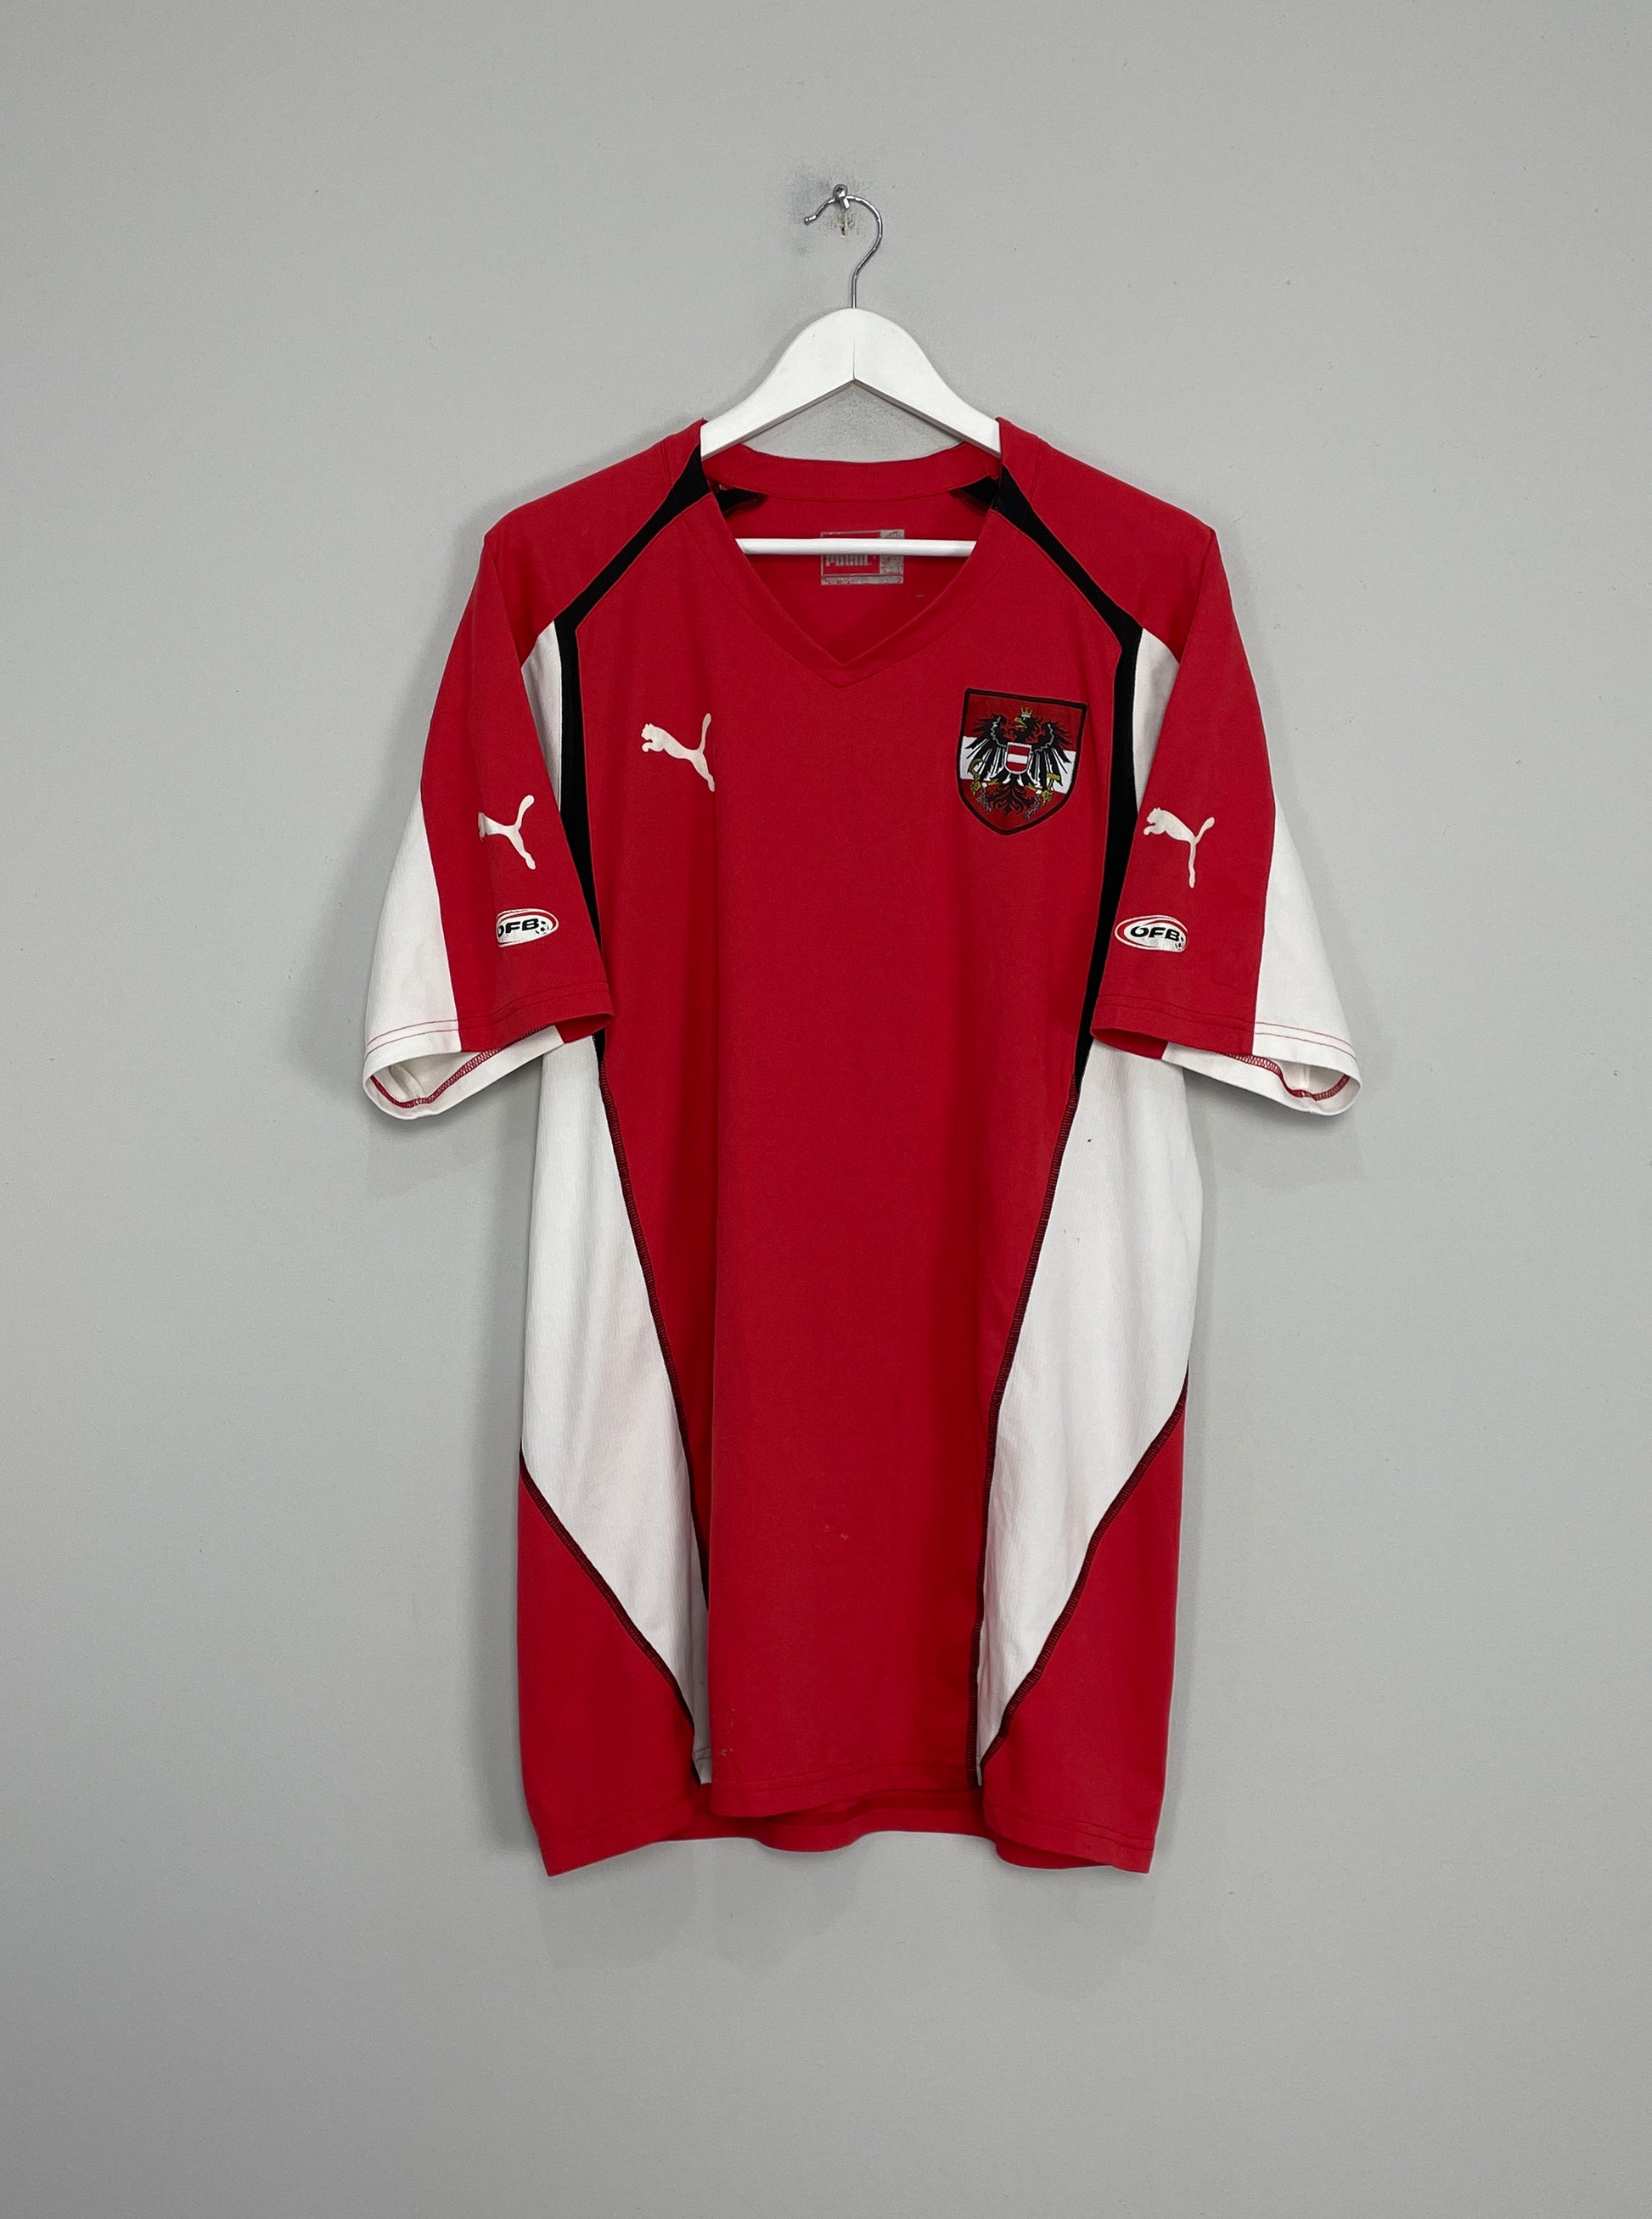 Image of the Austria shirt from the 2004/05 season